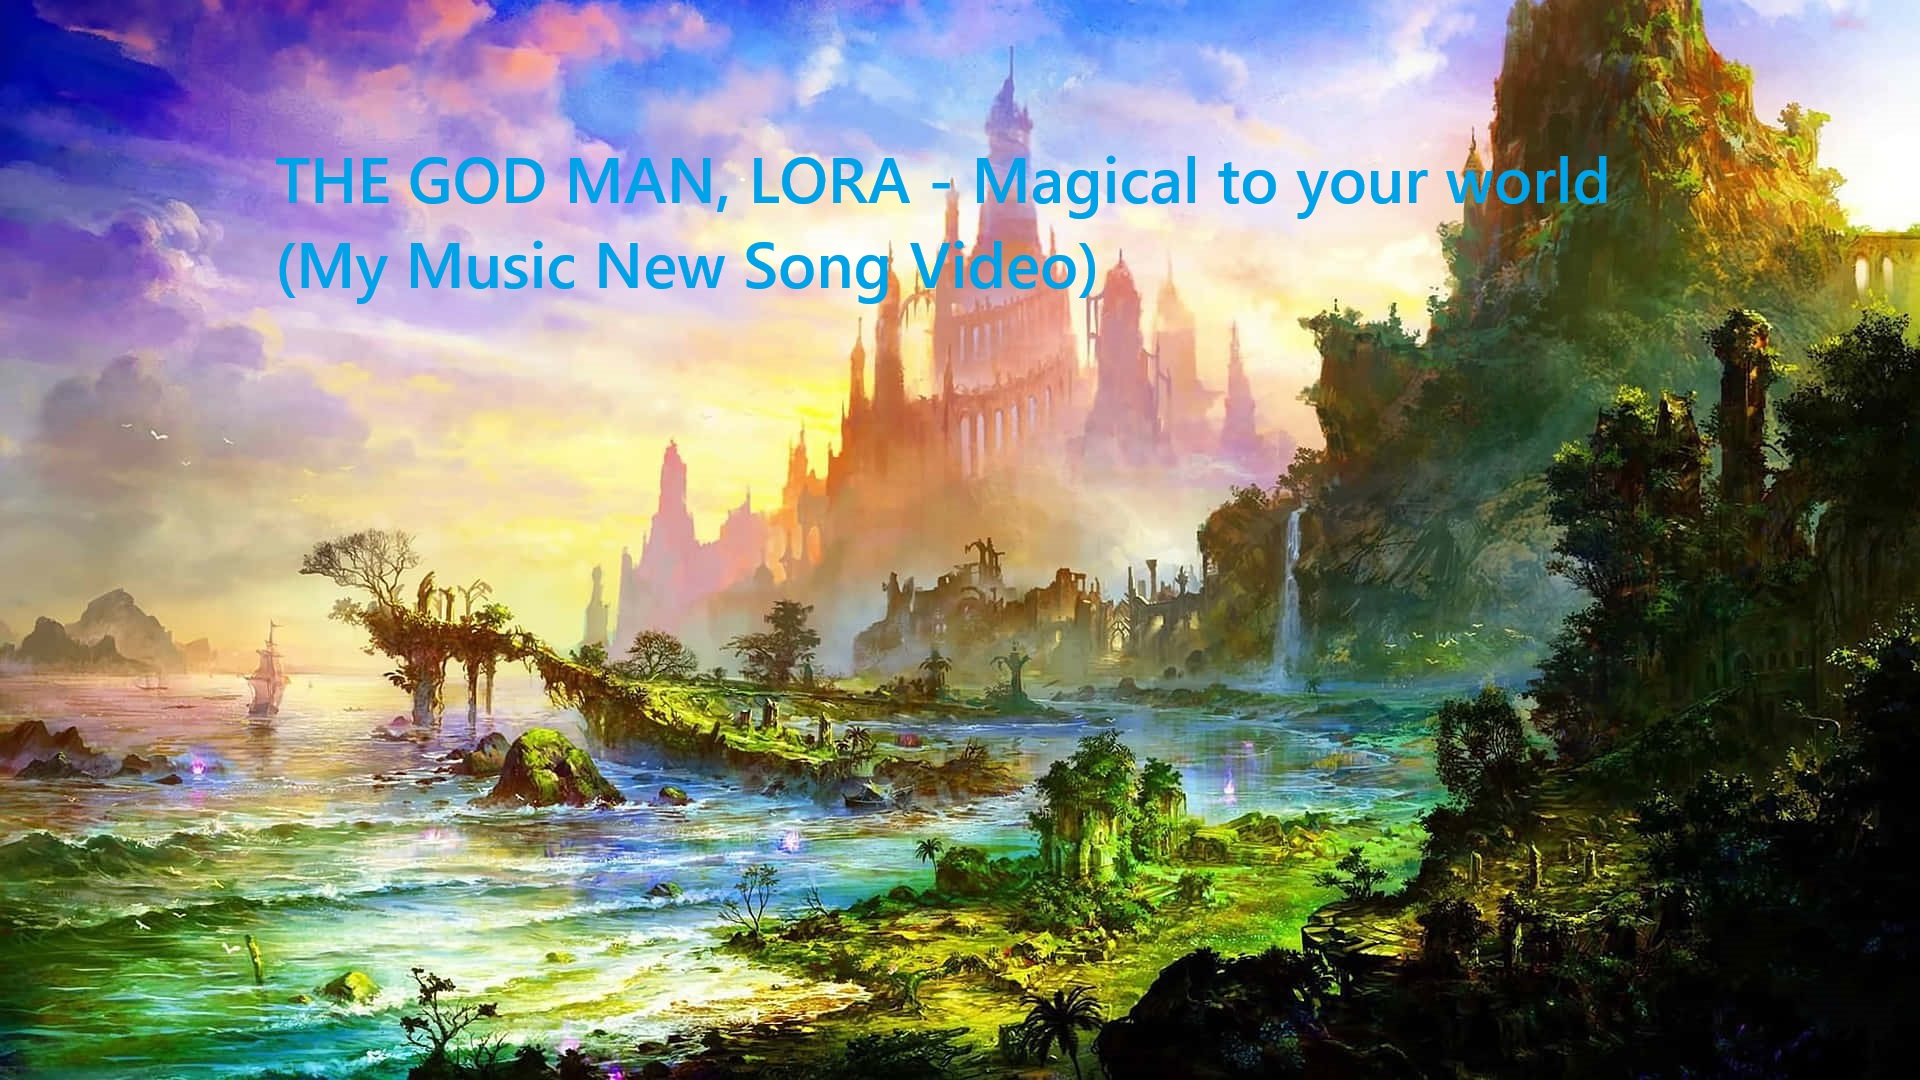 The God Man, Lora - Magical to your world (My Music Song New Video)